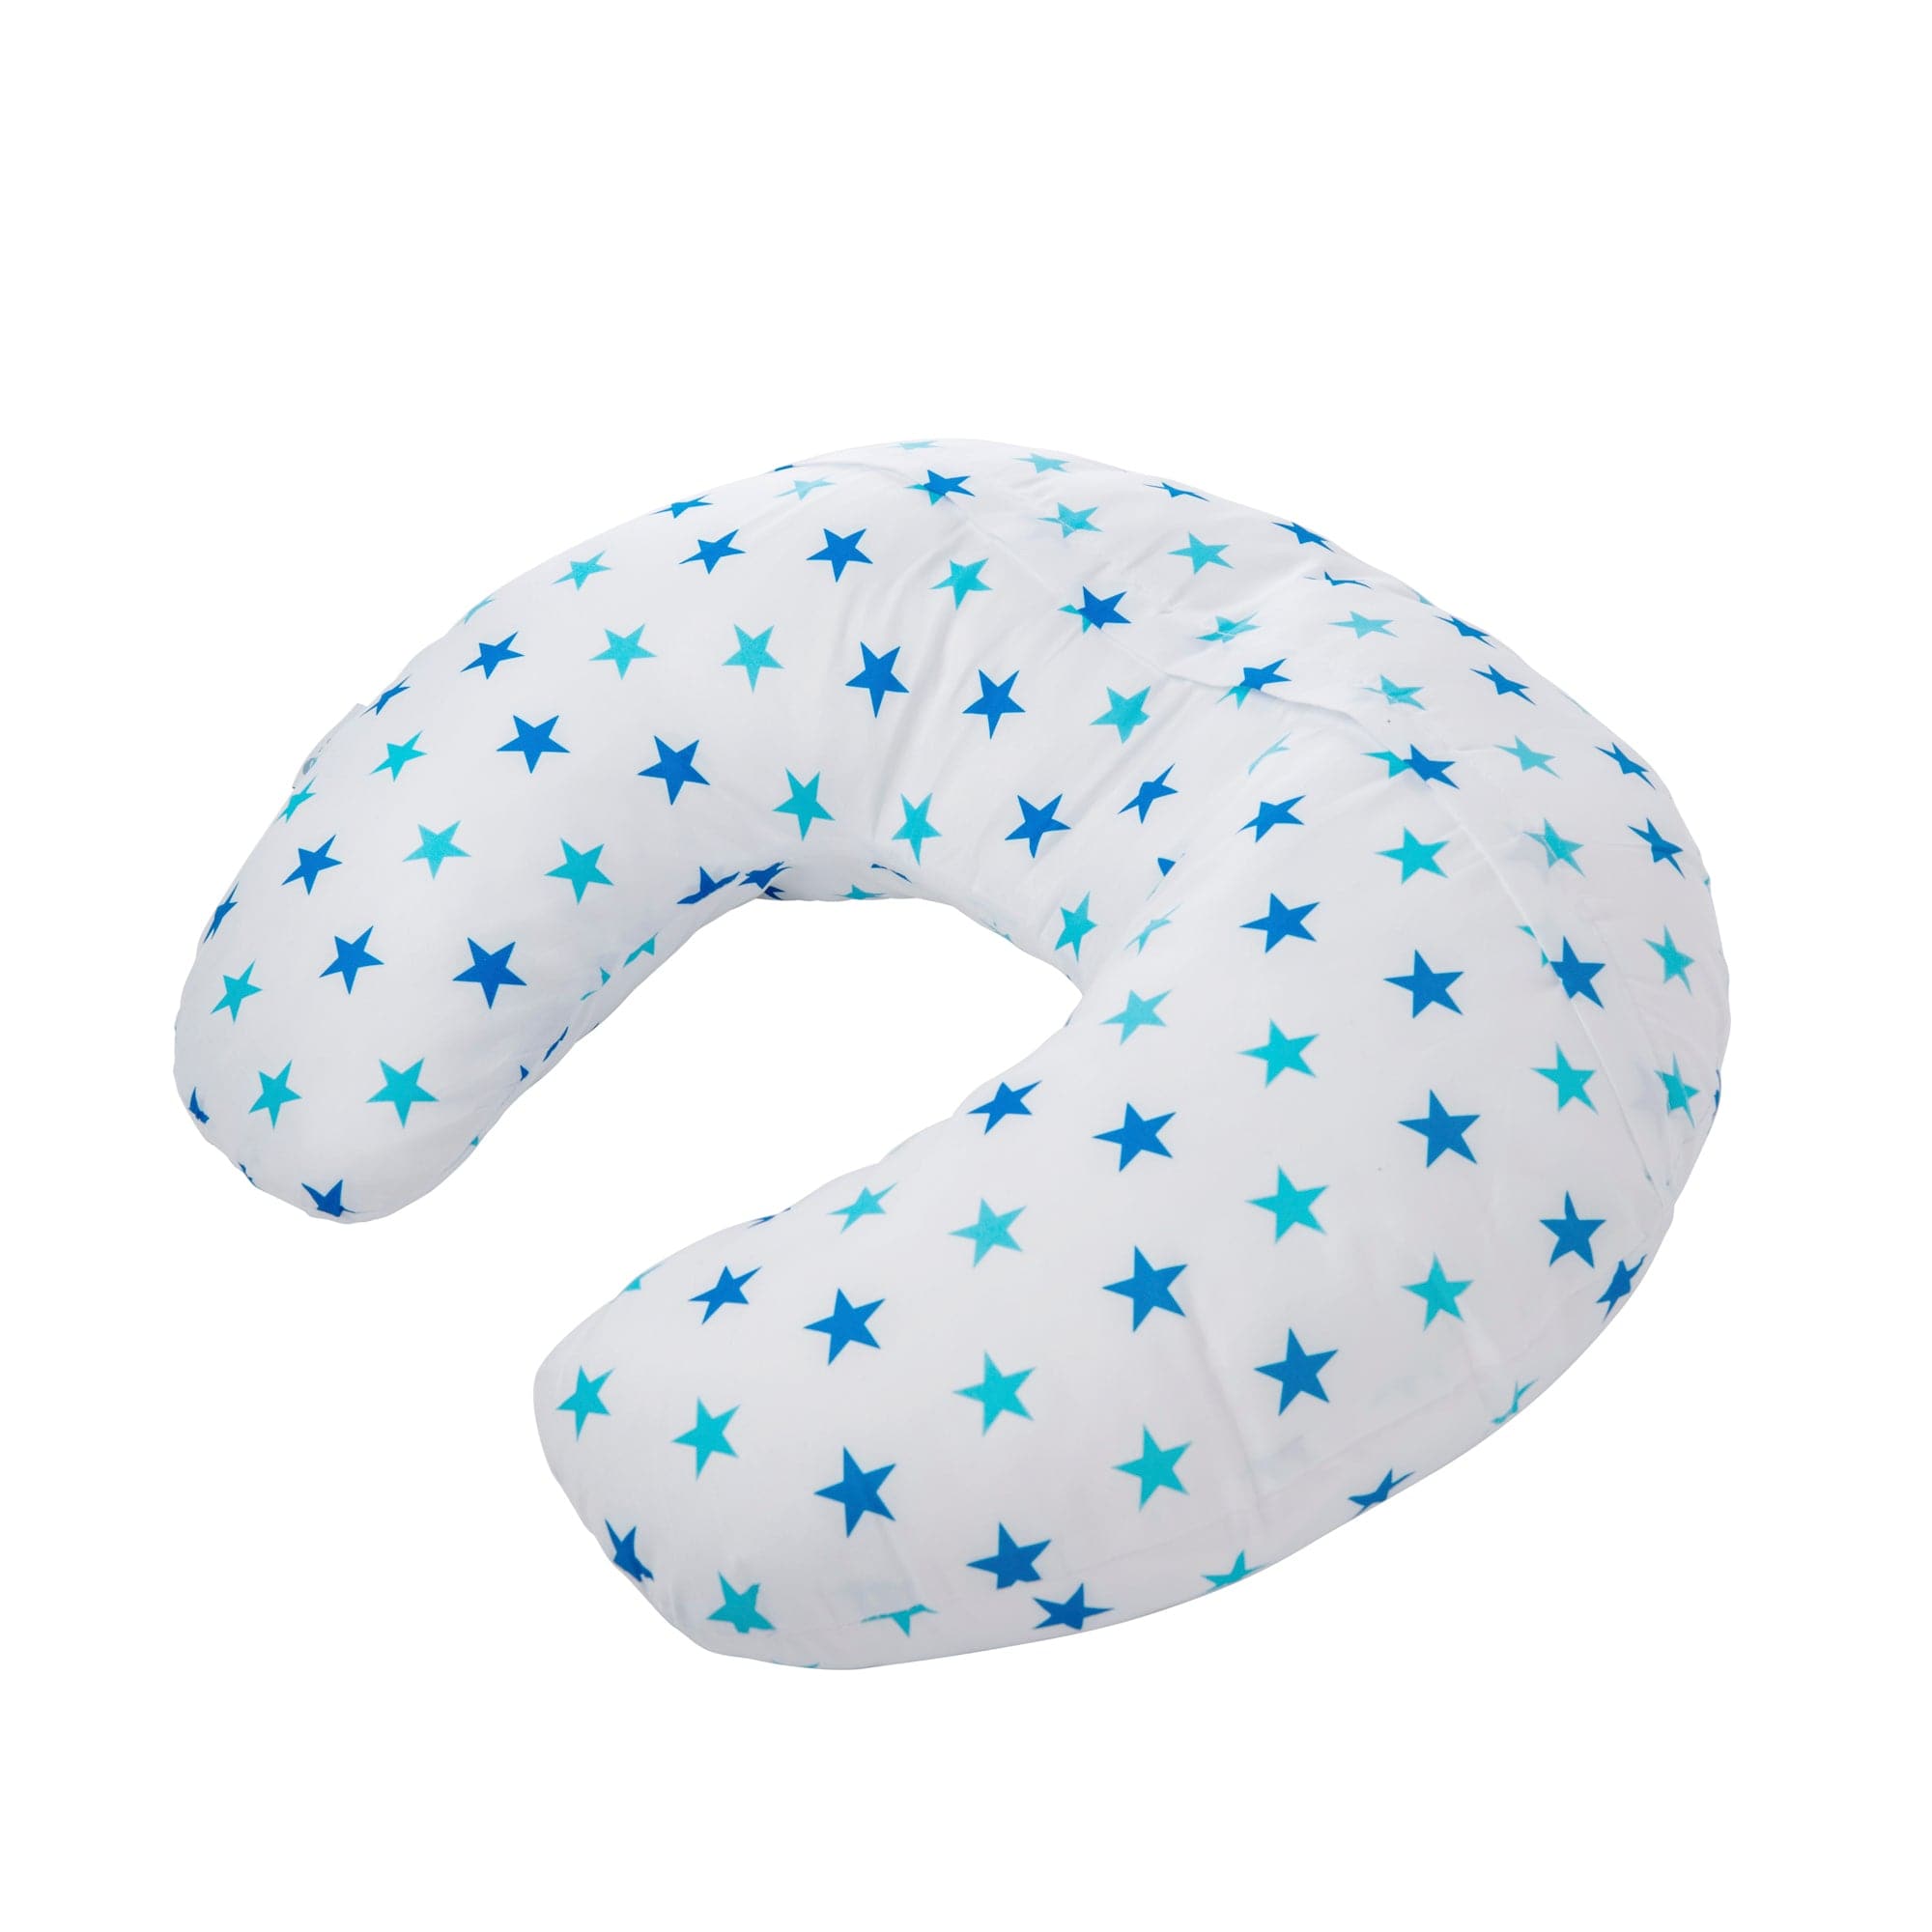 Breast Feeding Nursing Pillow - Little Blue Star (COVER ONLY) - For Your Little One